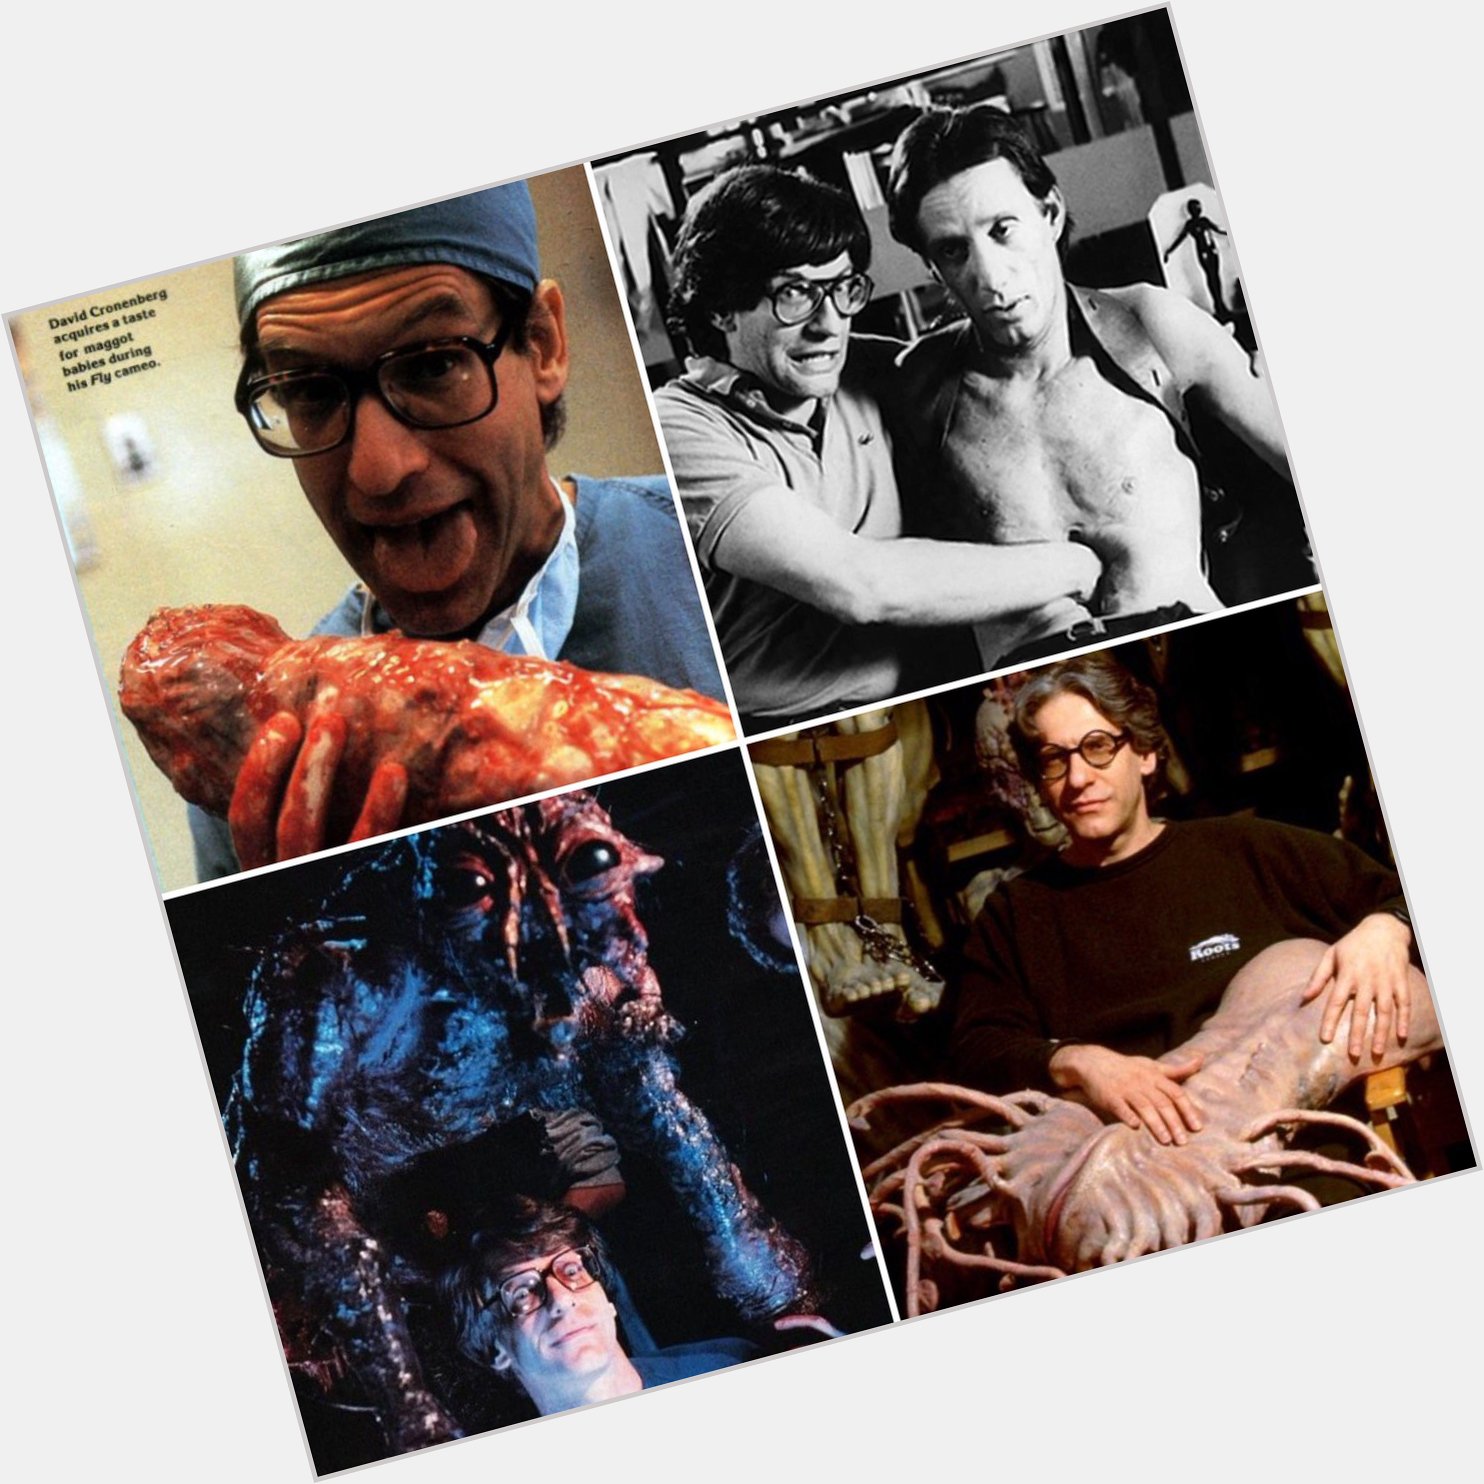 Happy 74th birthday to one of the most brilliant weirdos to ever walk this planet, the amazing David Cronenberg! 